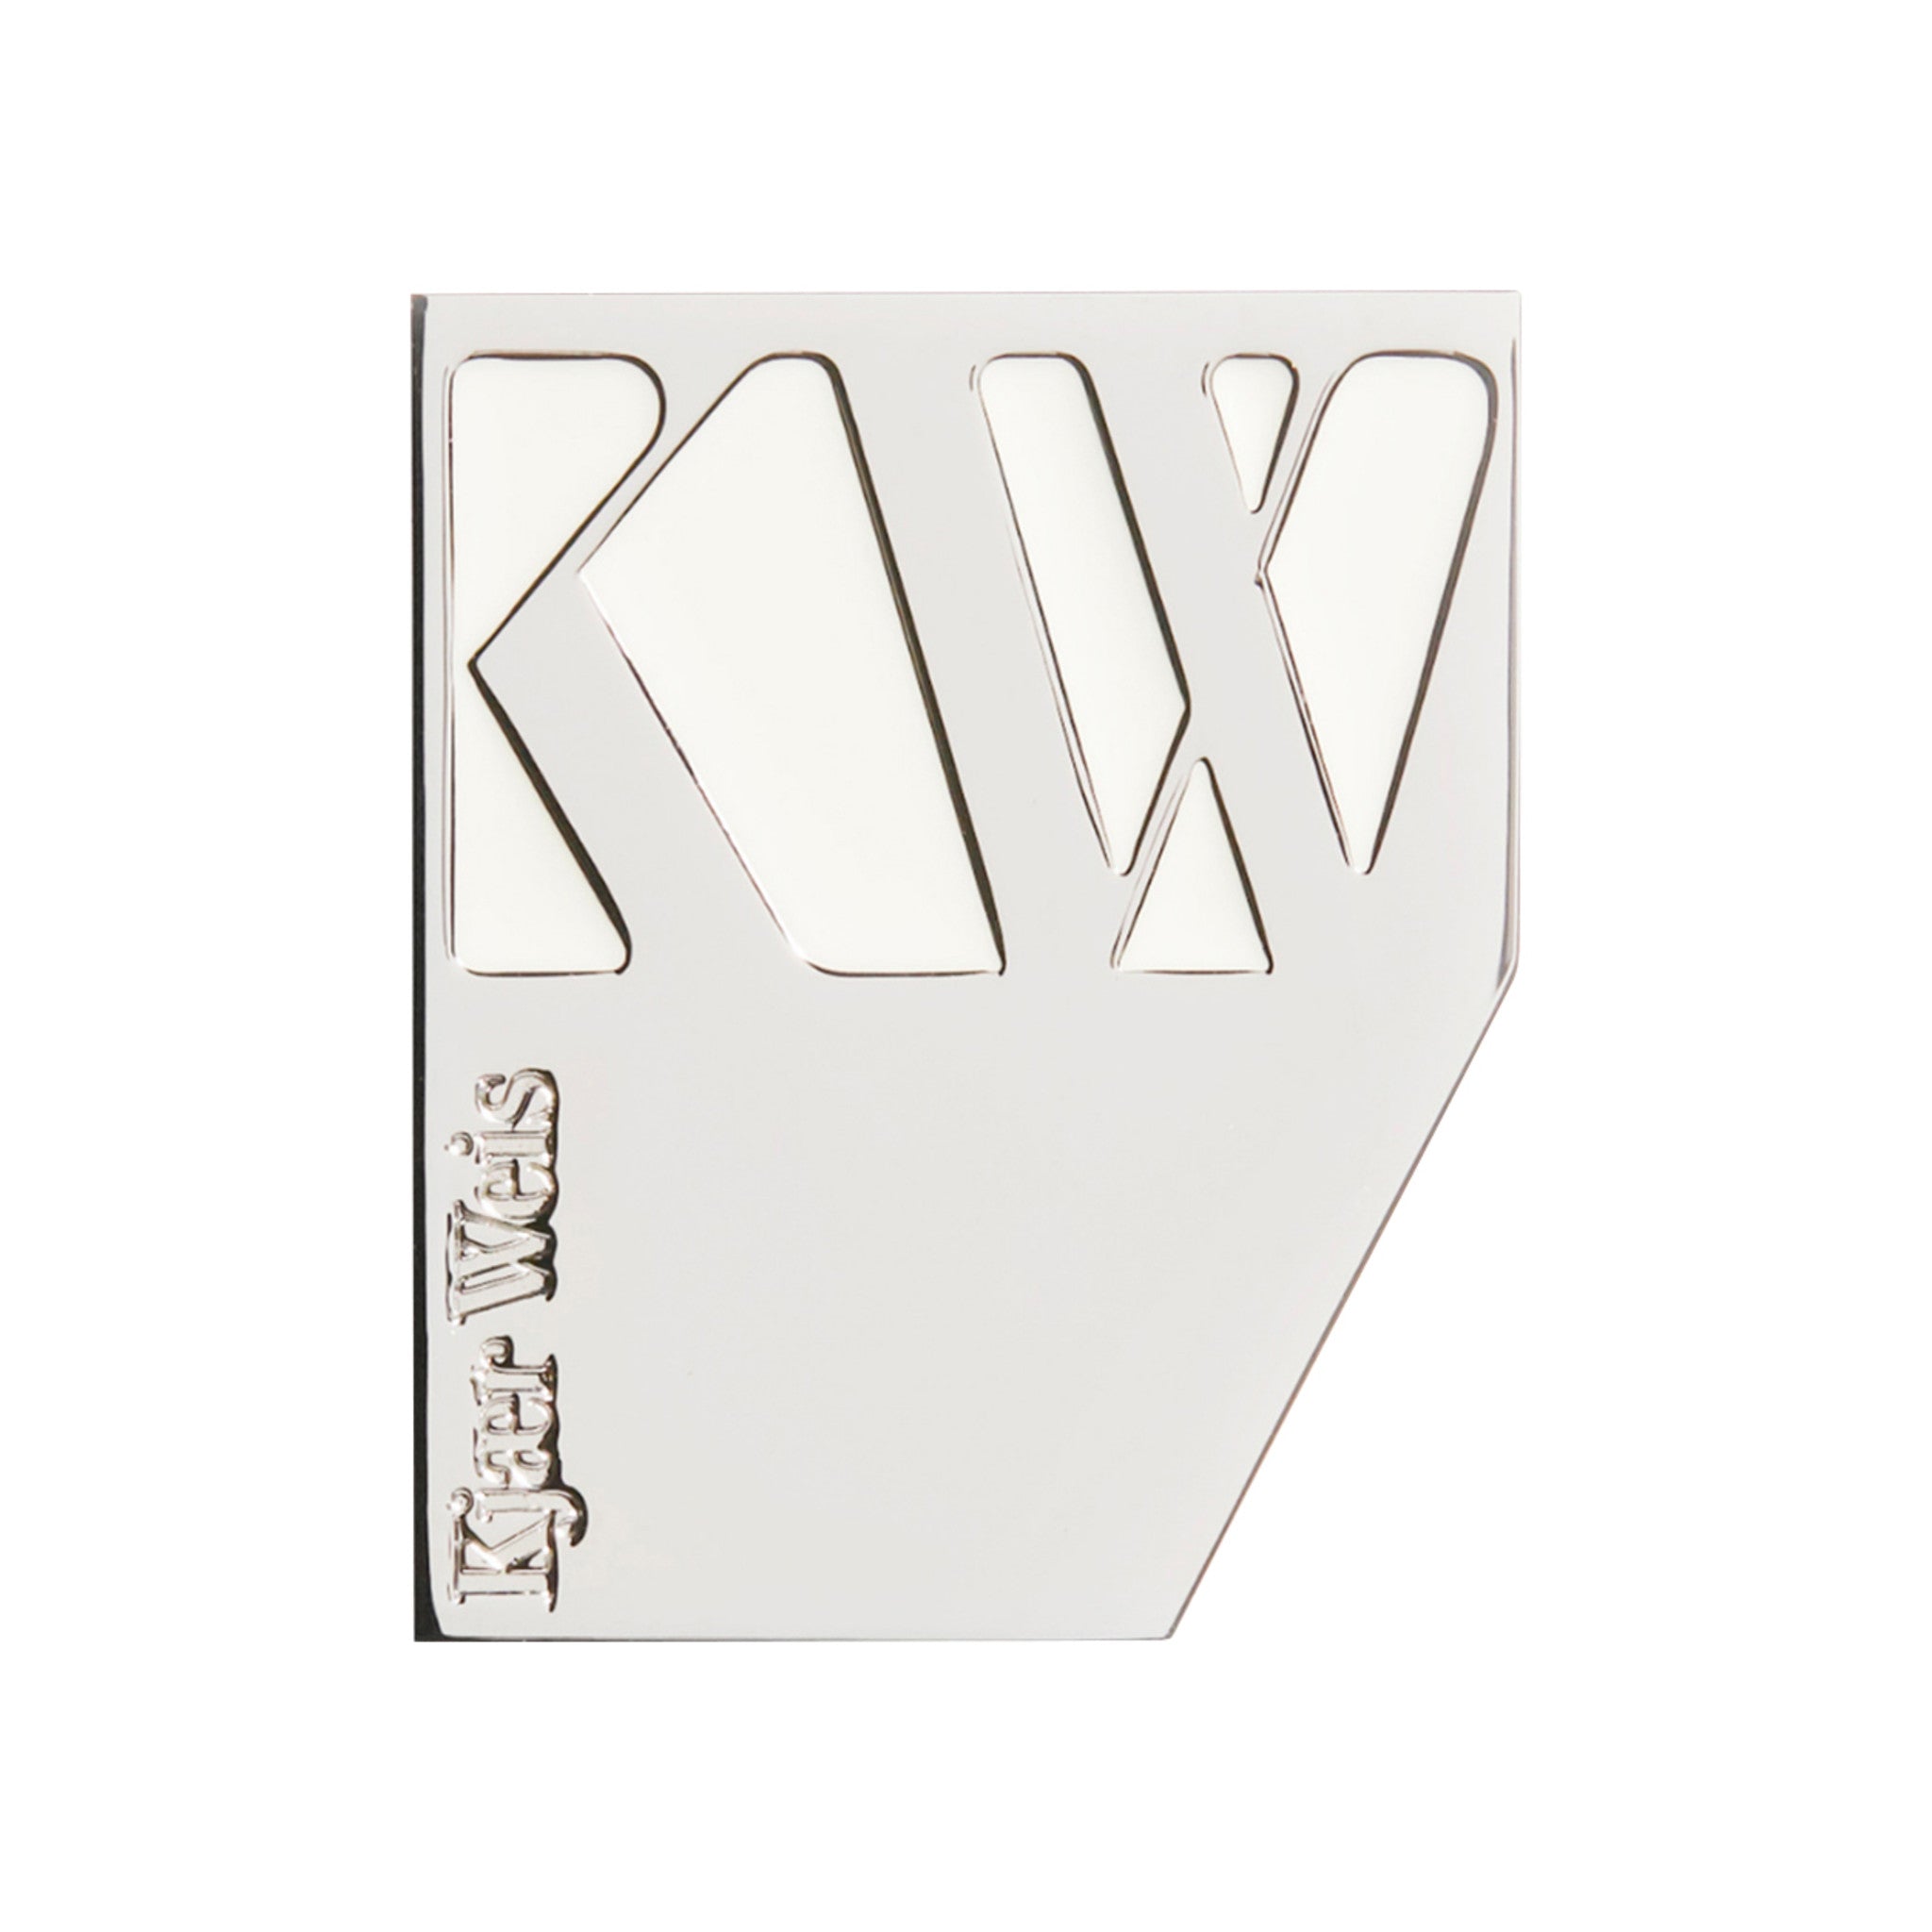 Kjaer Weis Iconic Edition Cheek Refill Case main image.